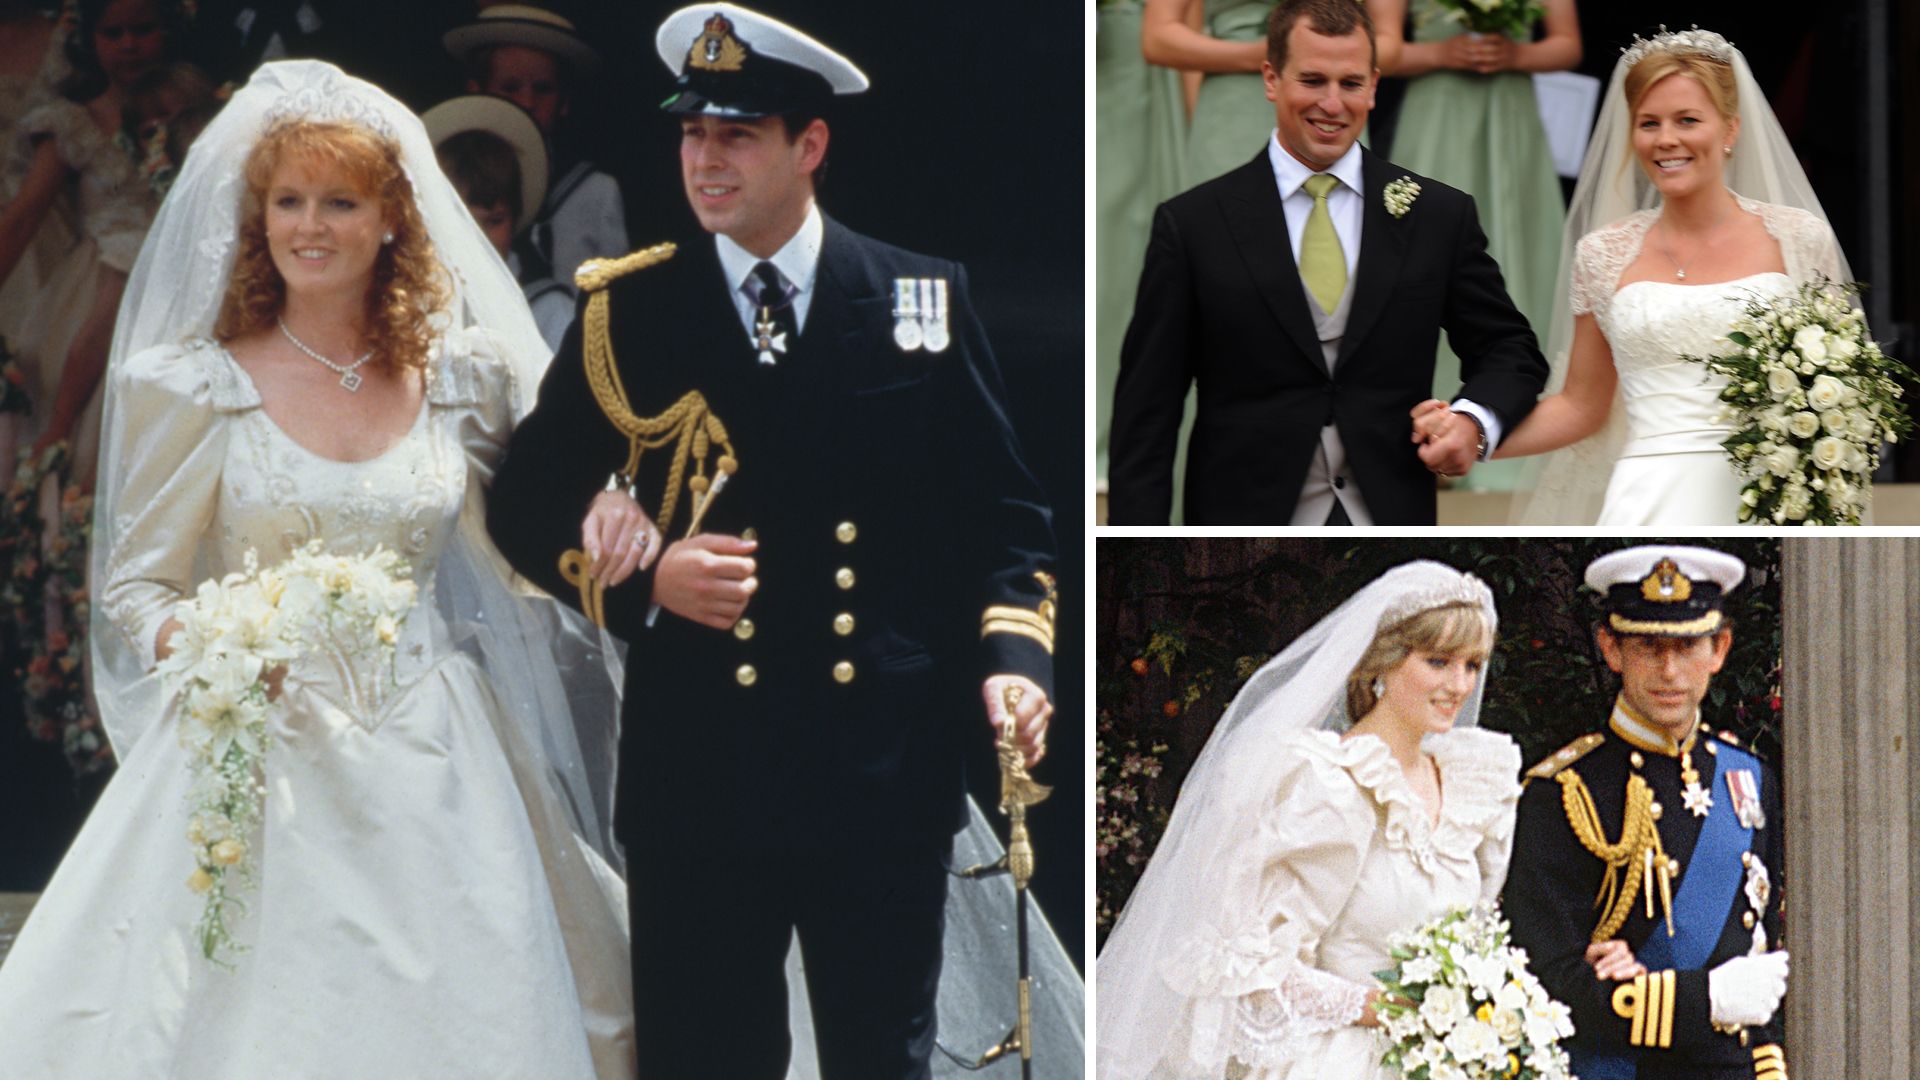 Royals announcing their divorce: Prince Andrew's 'amicable' split, King Charles' 'desirable' divorce & more